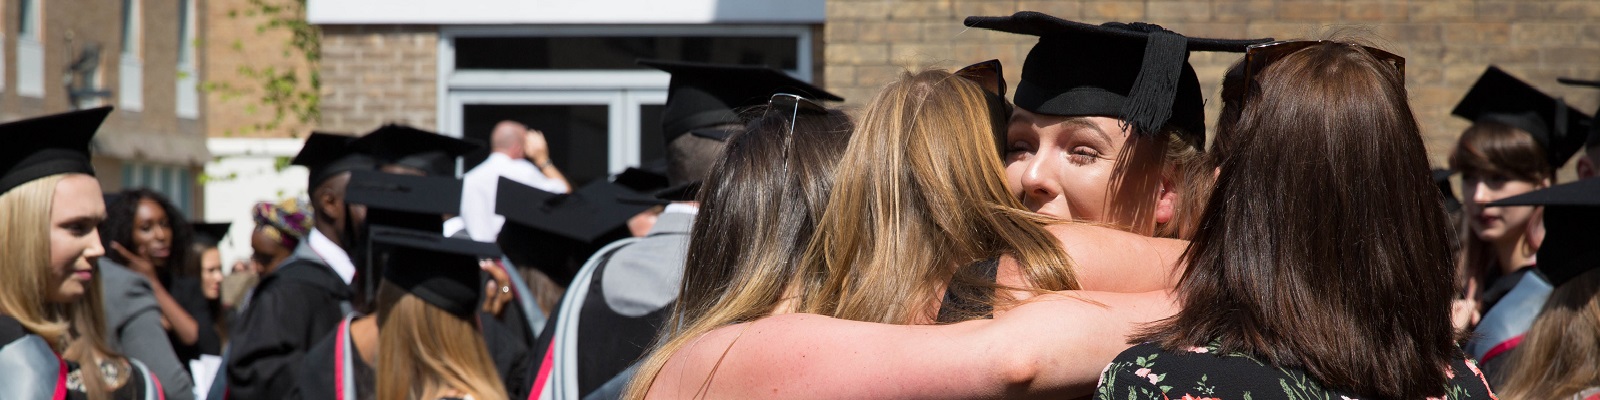 Family hugging a student just graduated wearing graduation robes